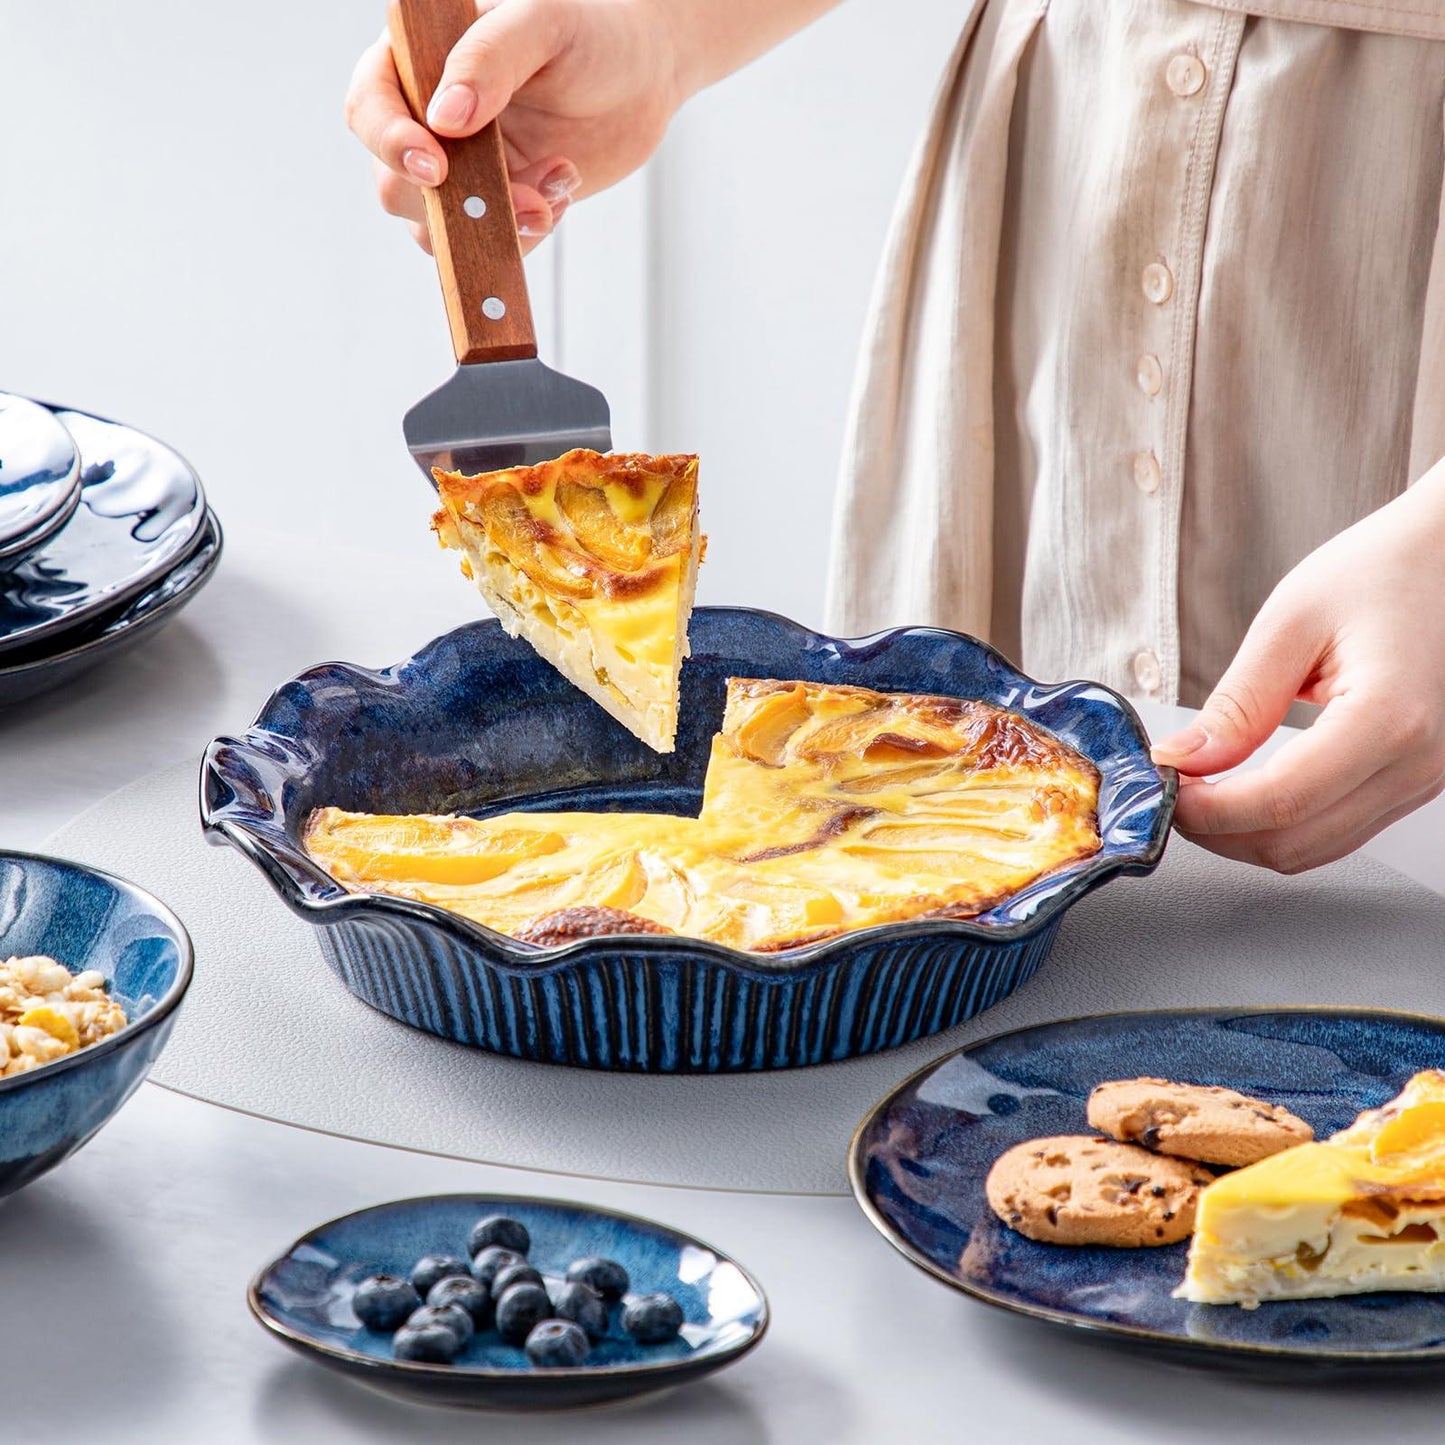 vancasso Stern Ceramic Pie Pan for Baking, 9 inch Pie Plates for Apple Pie and Quiche, Deep Pie Dish, Large Pot Pies, Thanksgiving Gifts for Women -Blue - CookCave